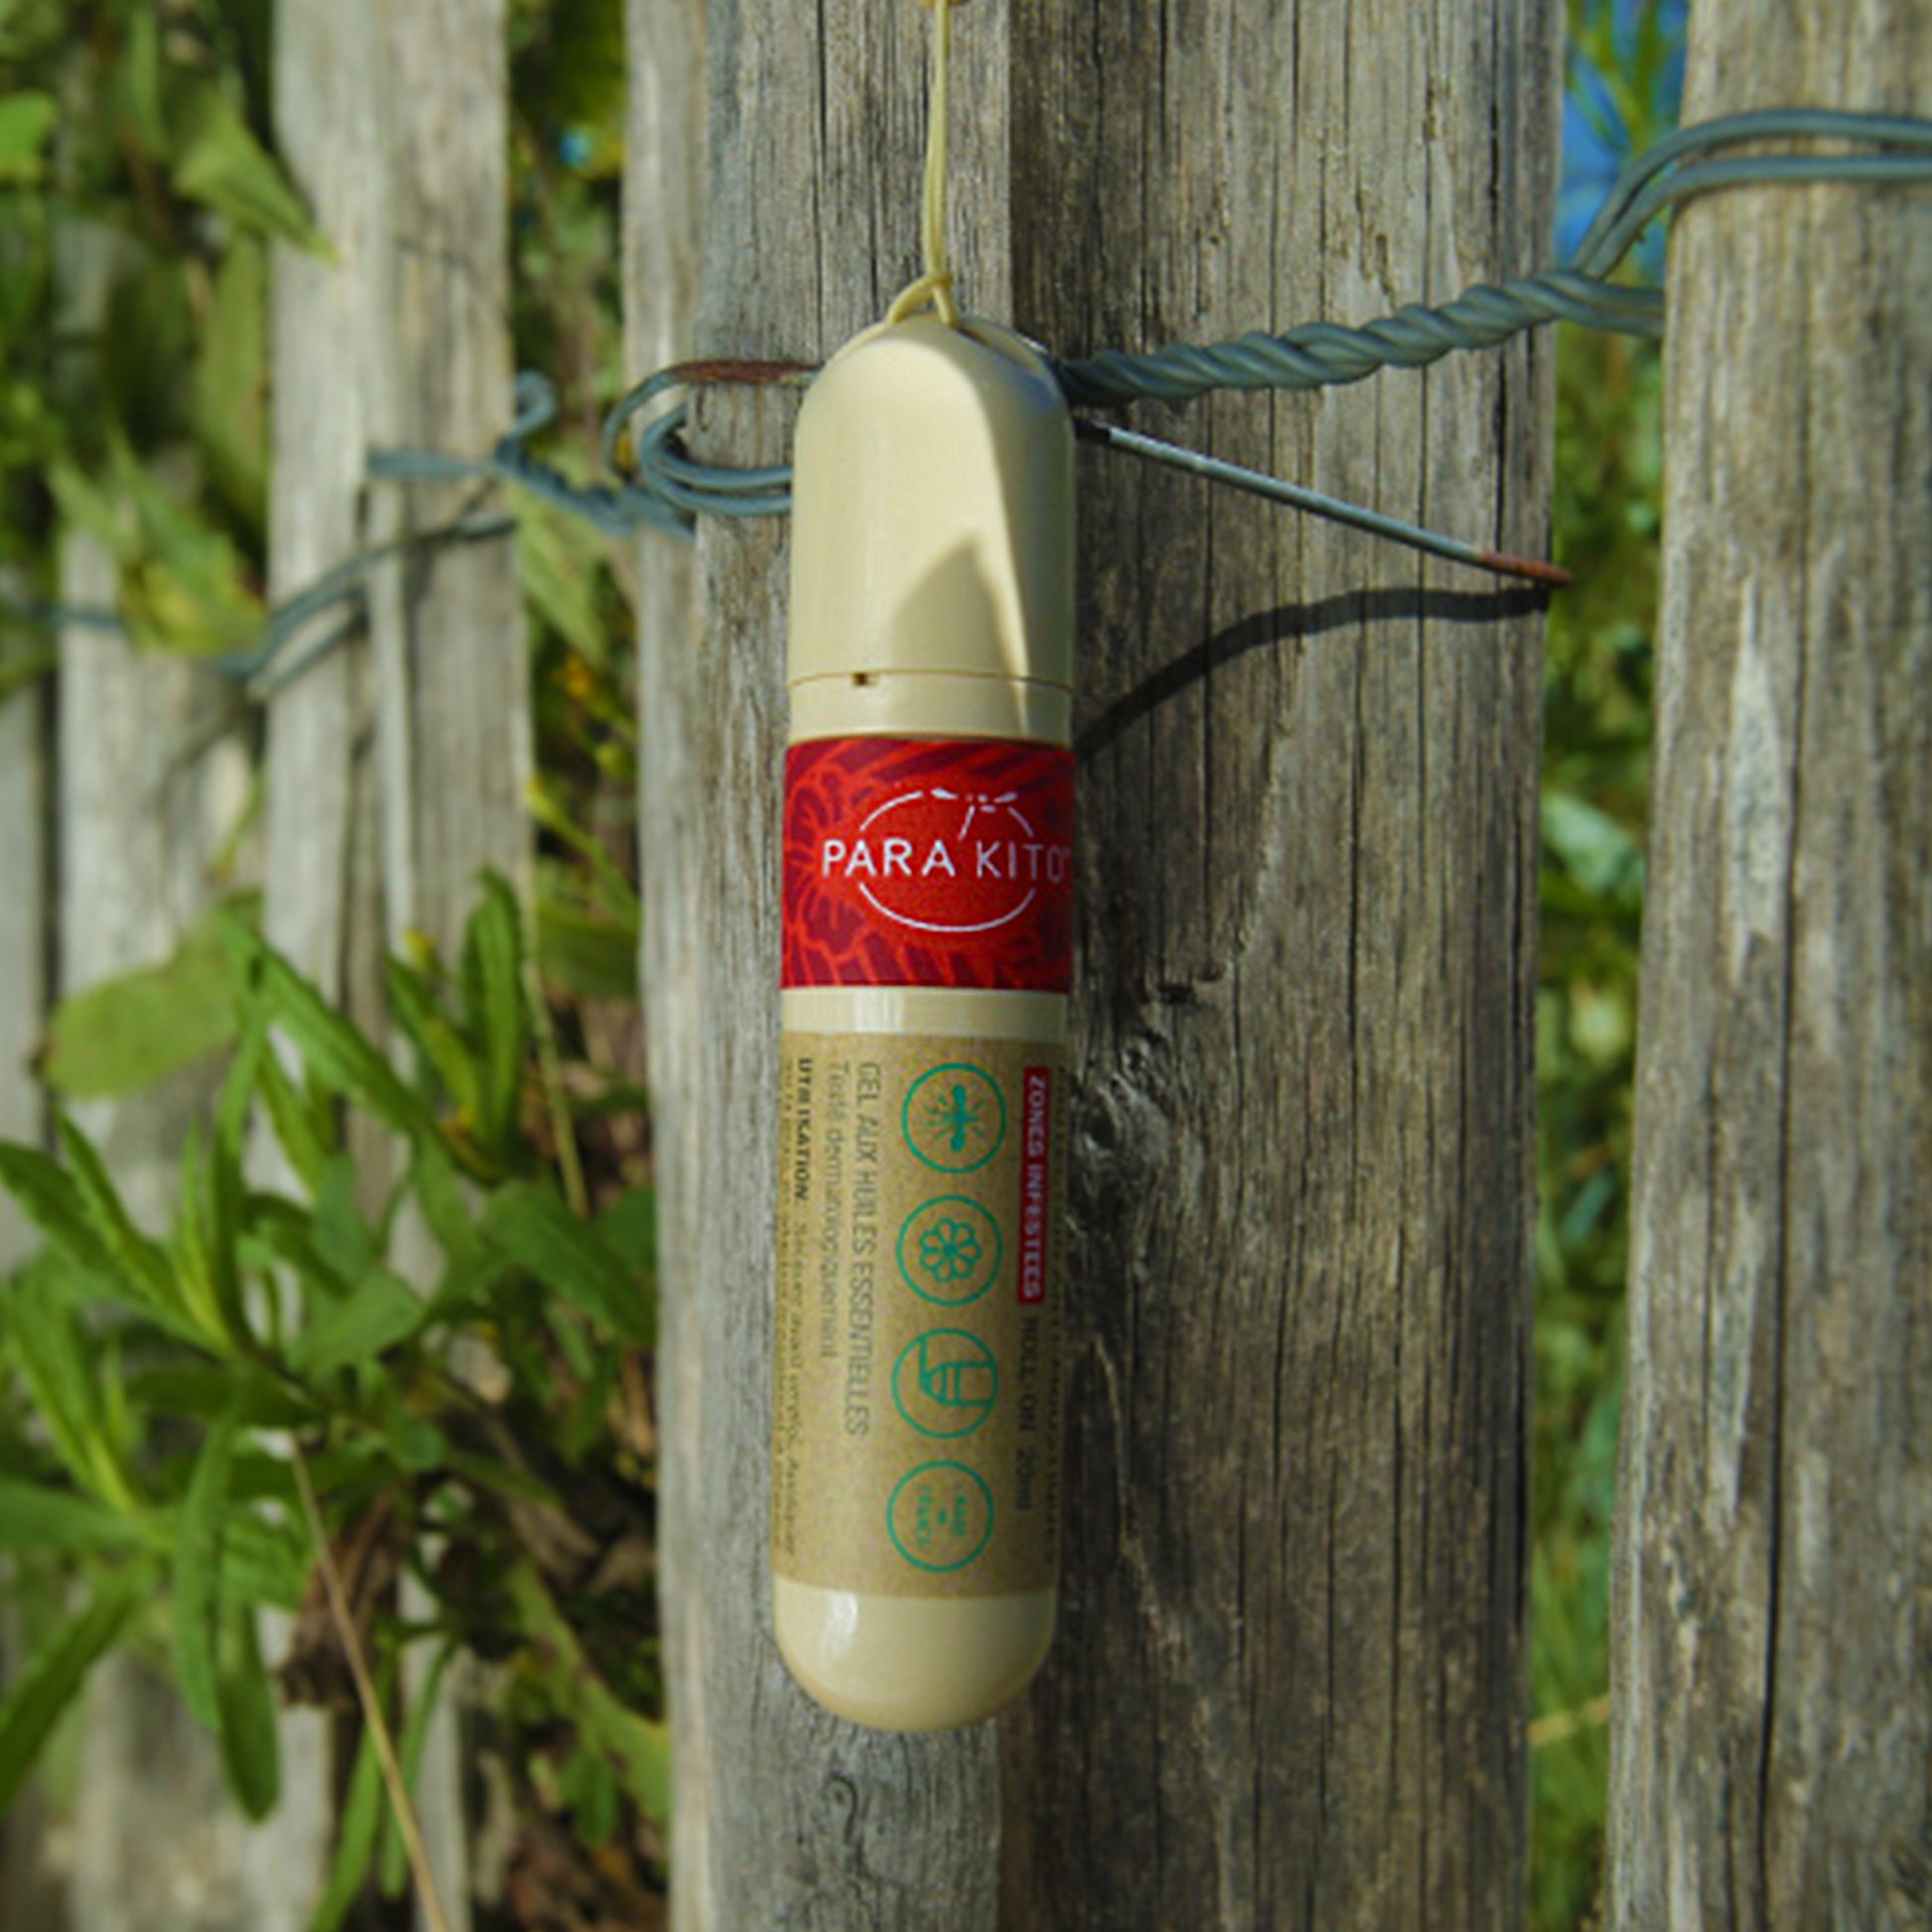 Parakito Mosquito Repellent Roll-on